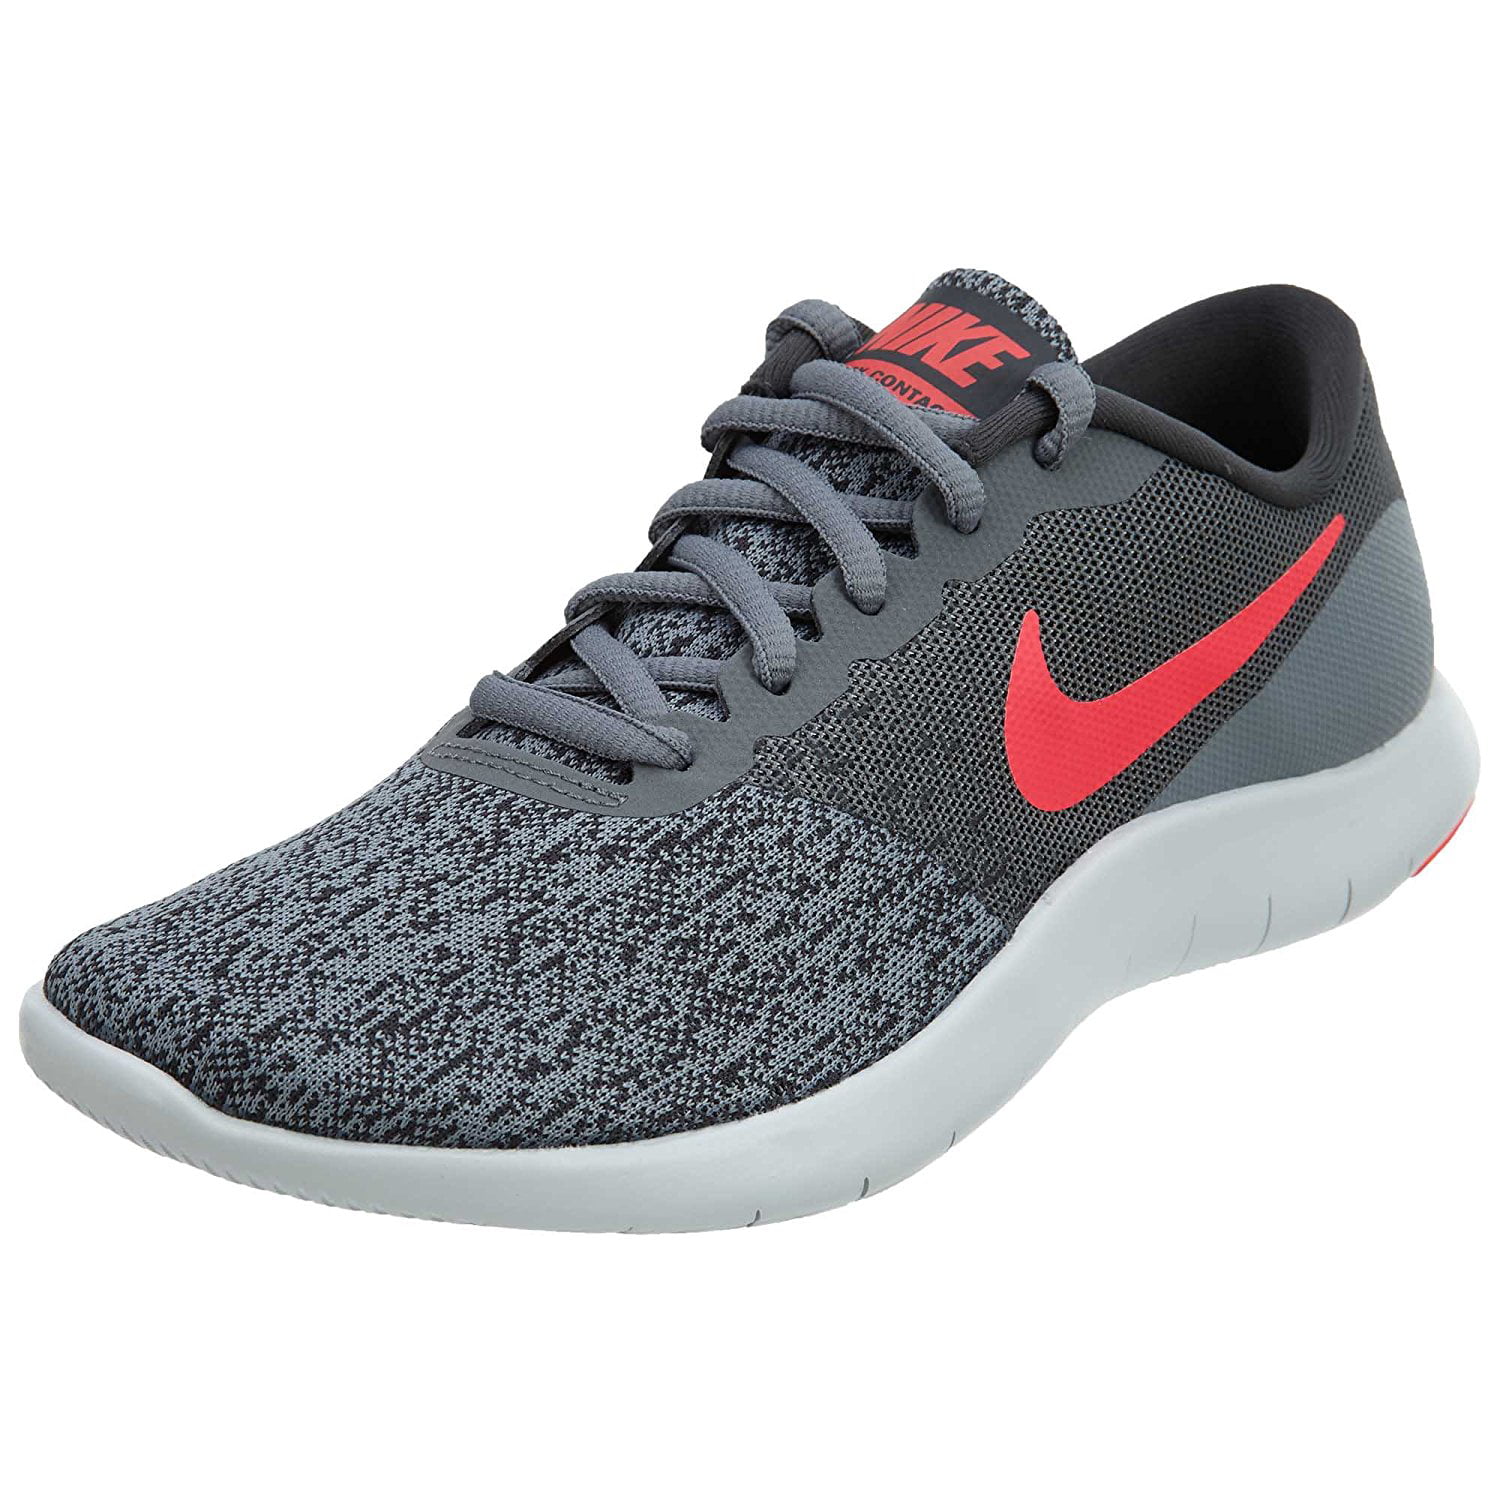 Nike - NIKE WOMENS FLEX CONTACT SHOES COOL GREY SOLAR RED ANTHRACITE ...